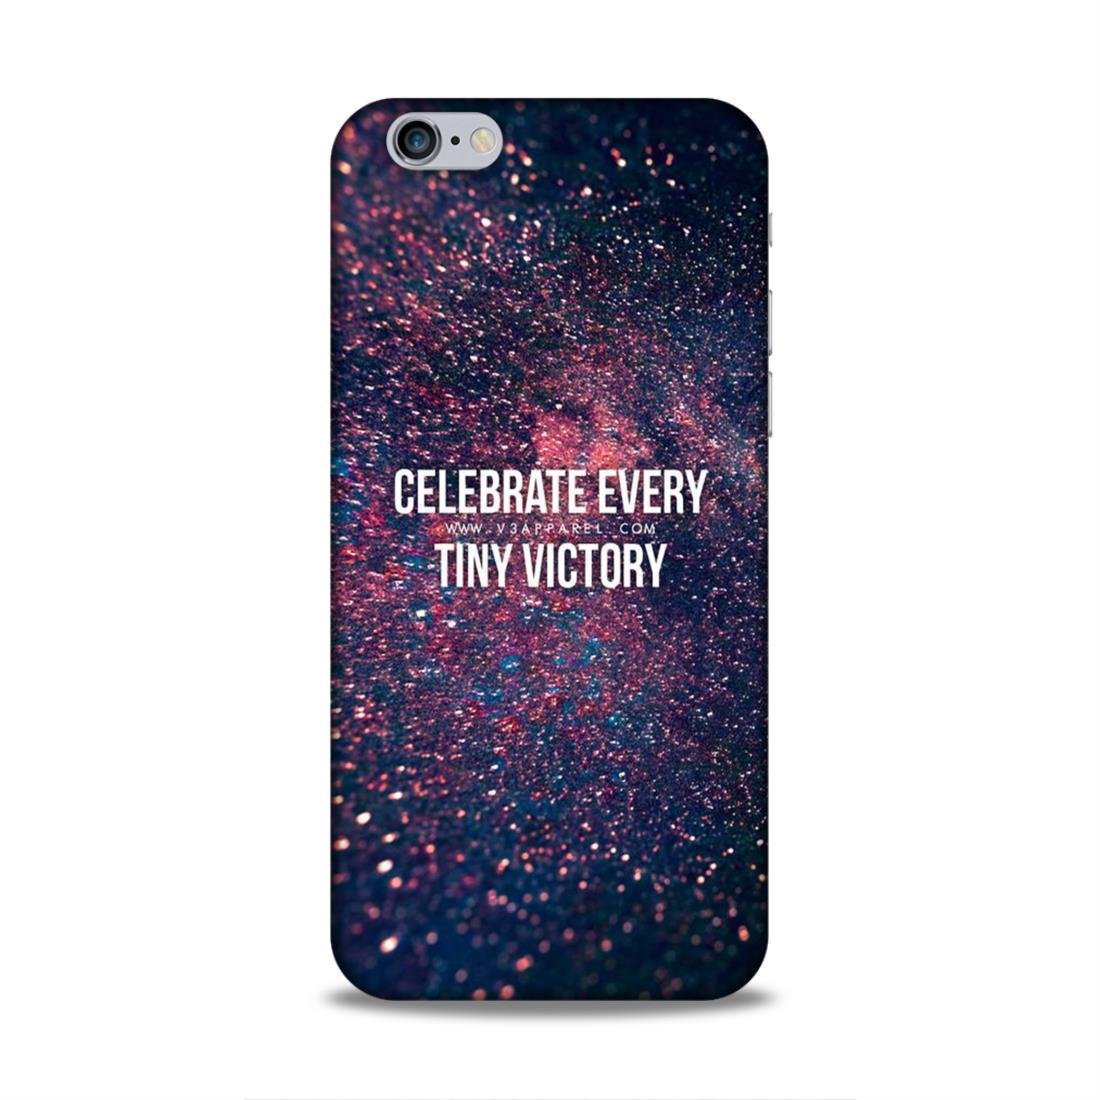 Celebrate Tiny Victory iPhone 6s Mobile Cover